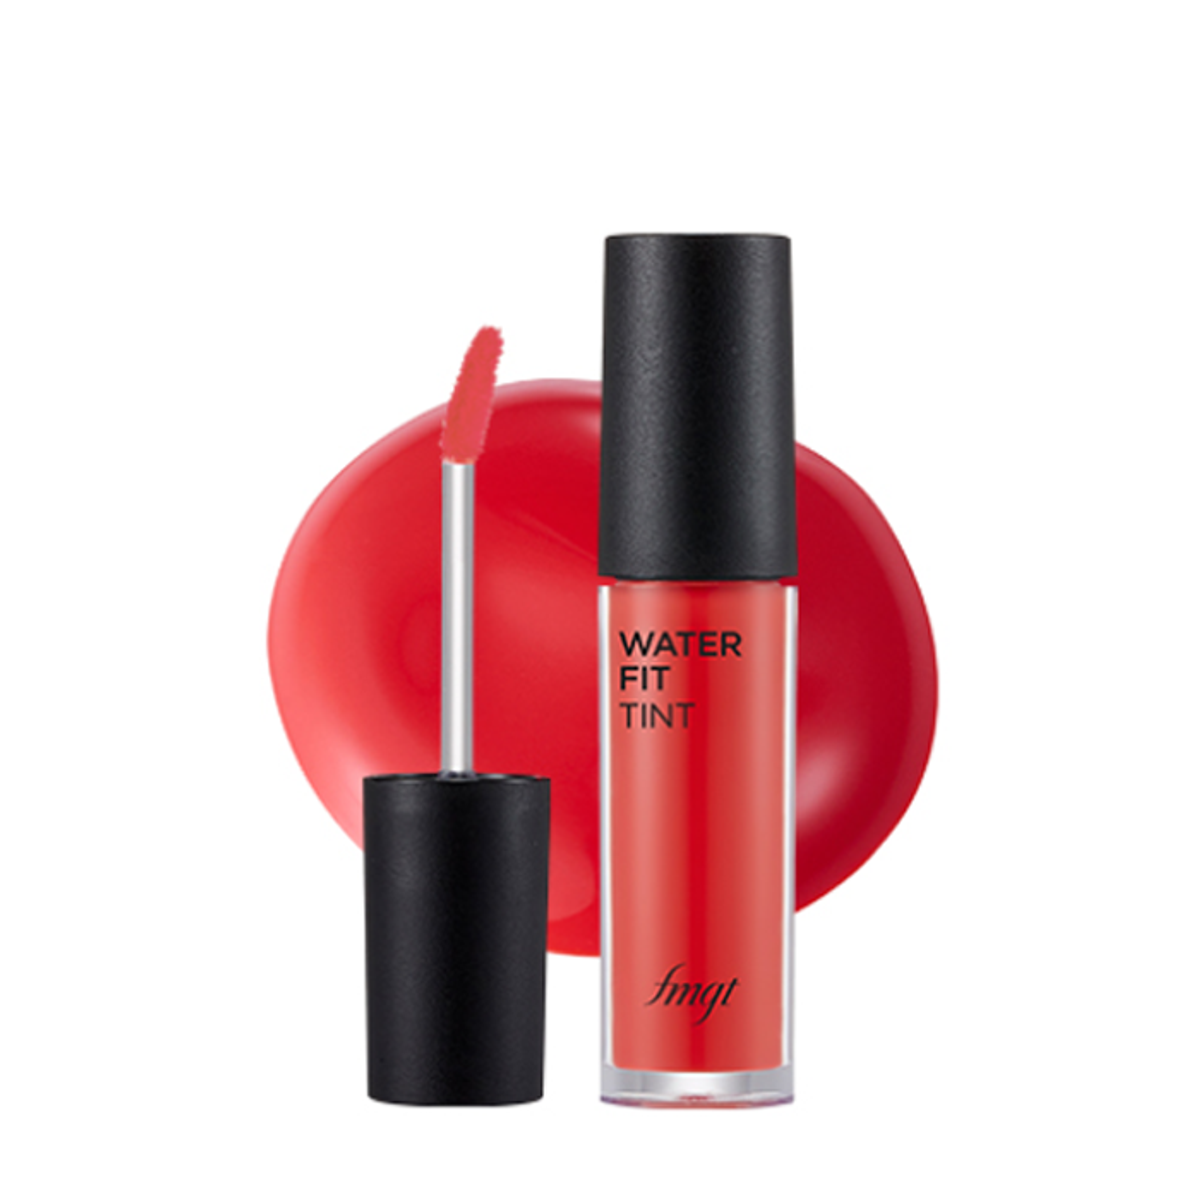 son-tint-thefaceshop-water-fit-lip-tint-5g-1